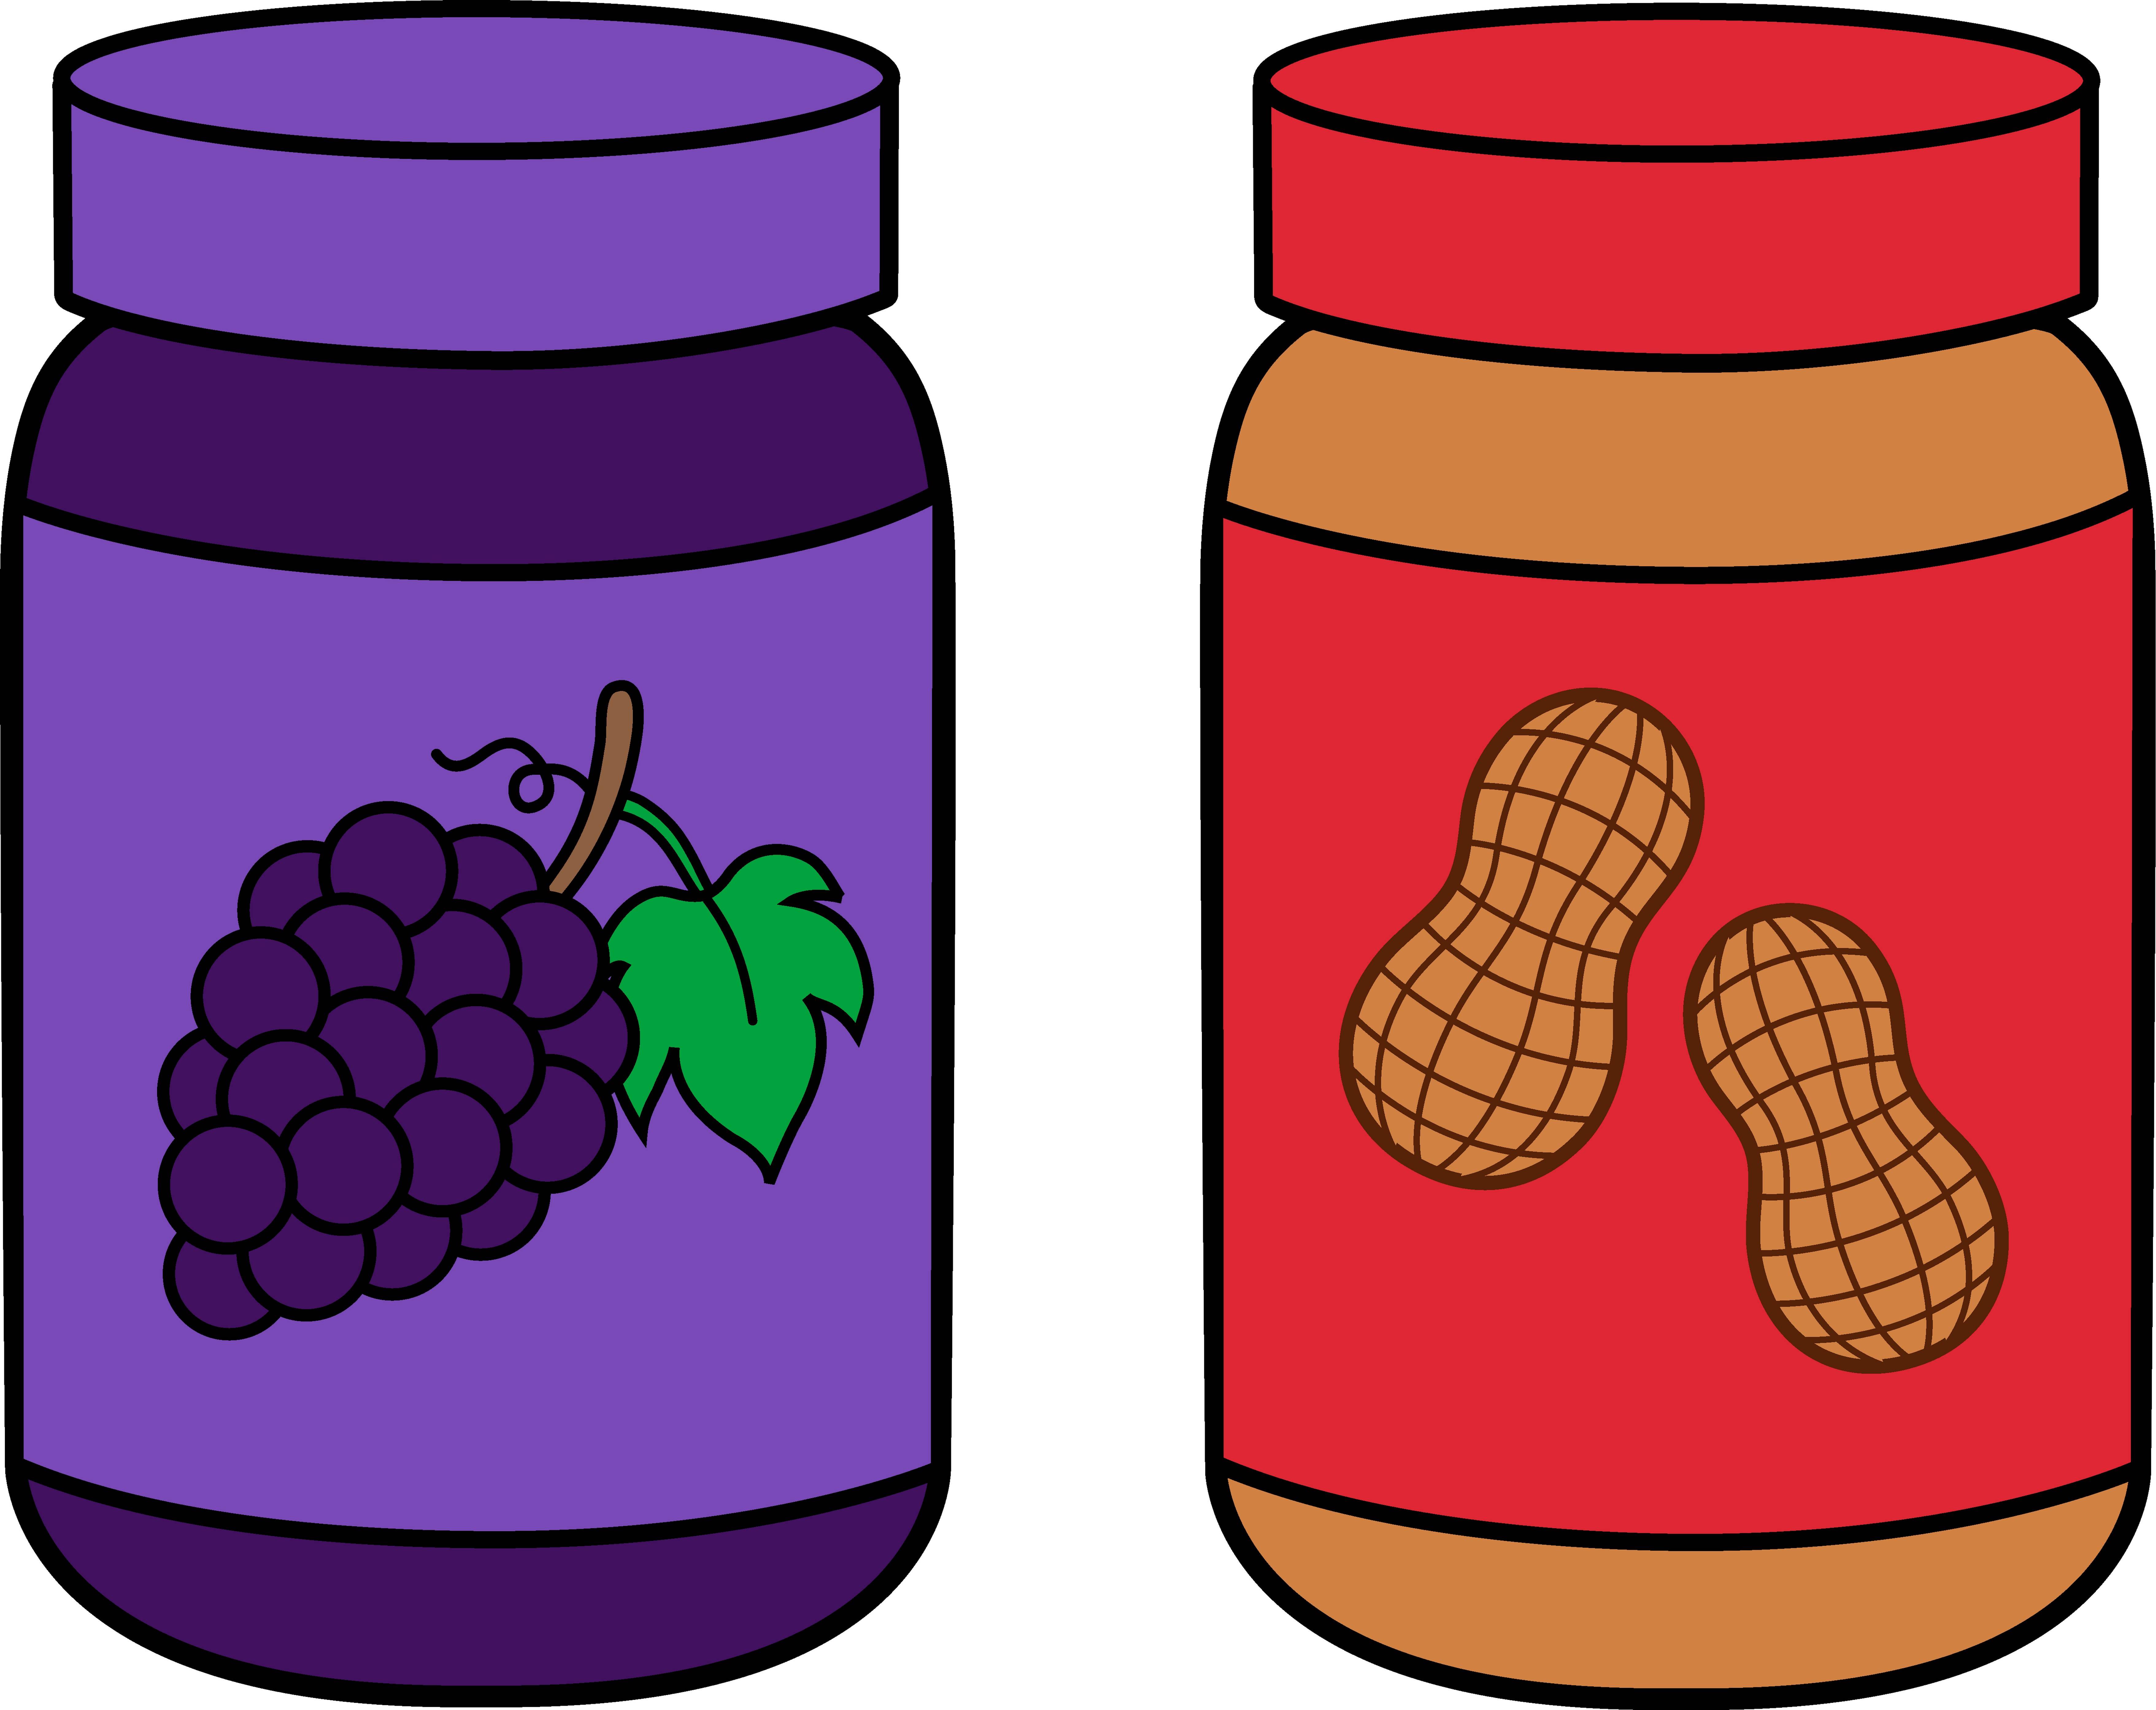 Peanut Butter And Jelly Sandwich Clipart - Free ...